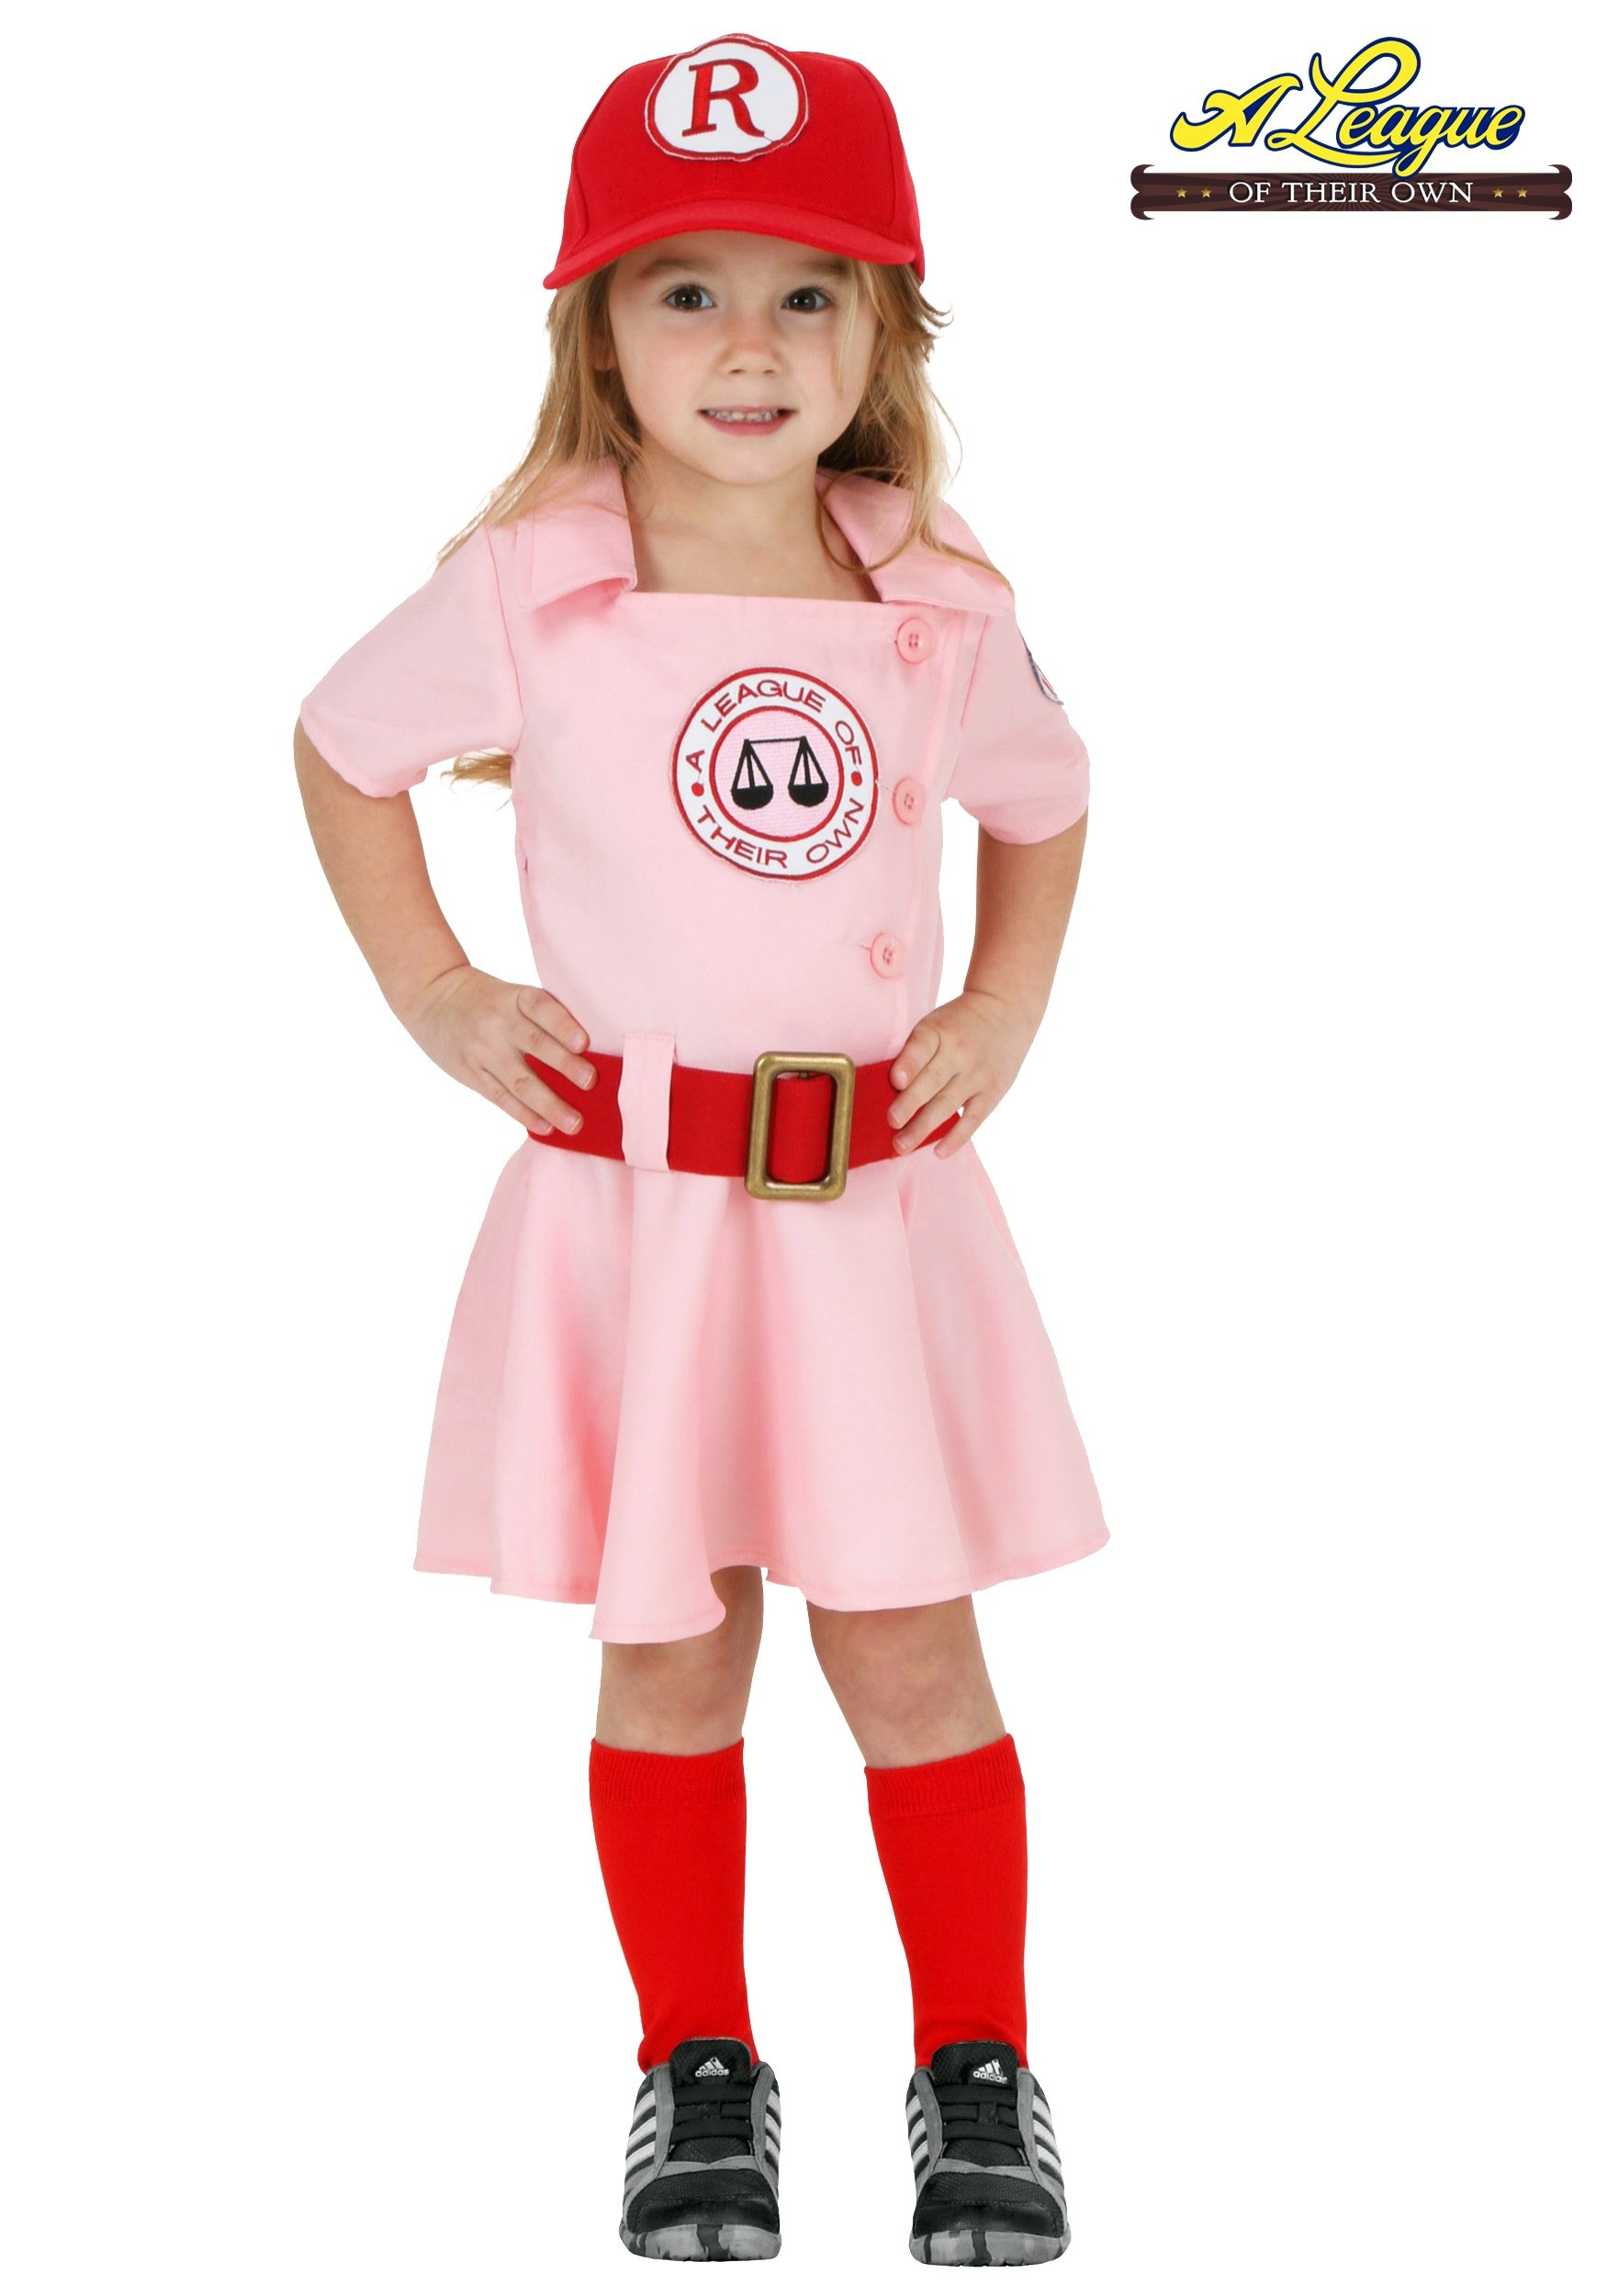 Toddler DIY Costumes
 Toddler A League of Their Own Dottie Costume